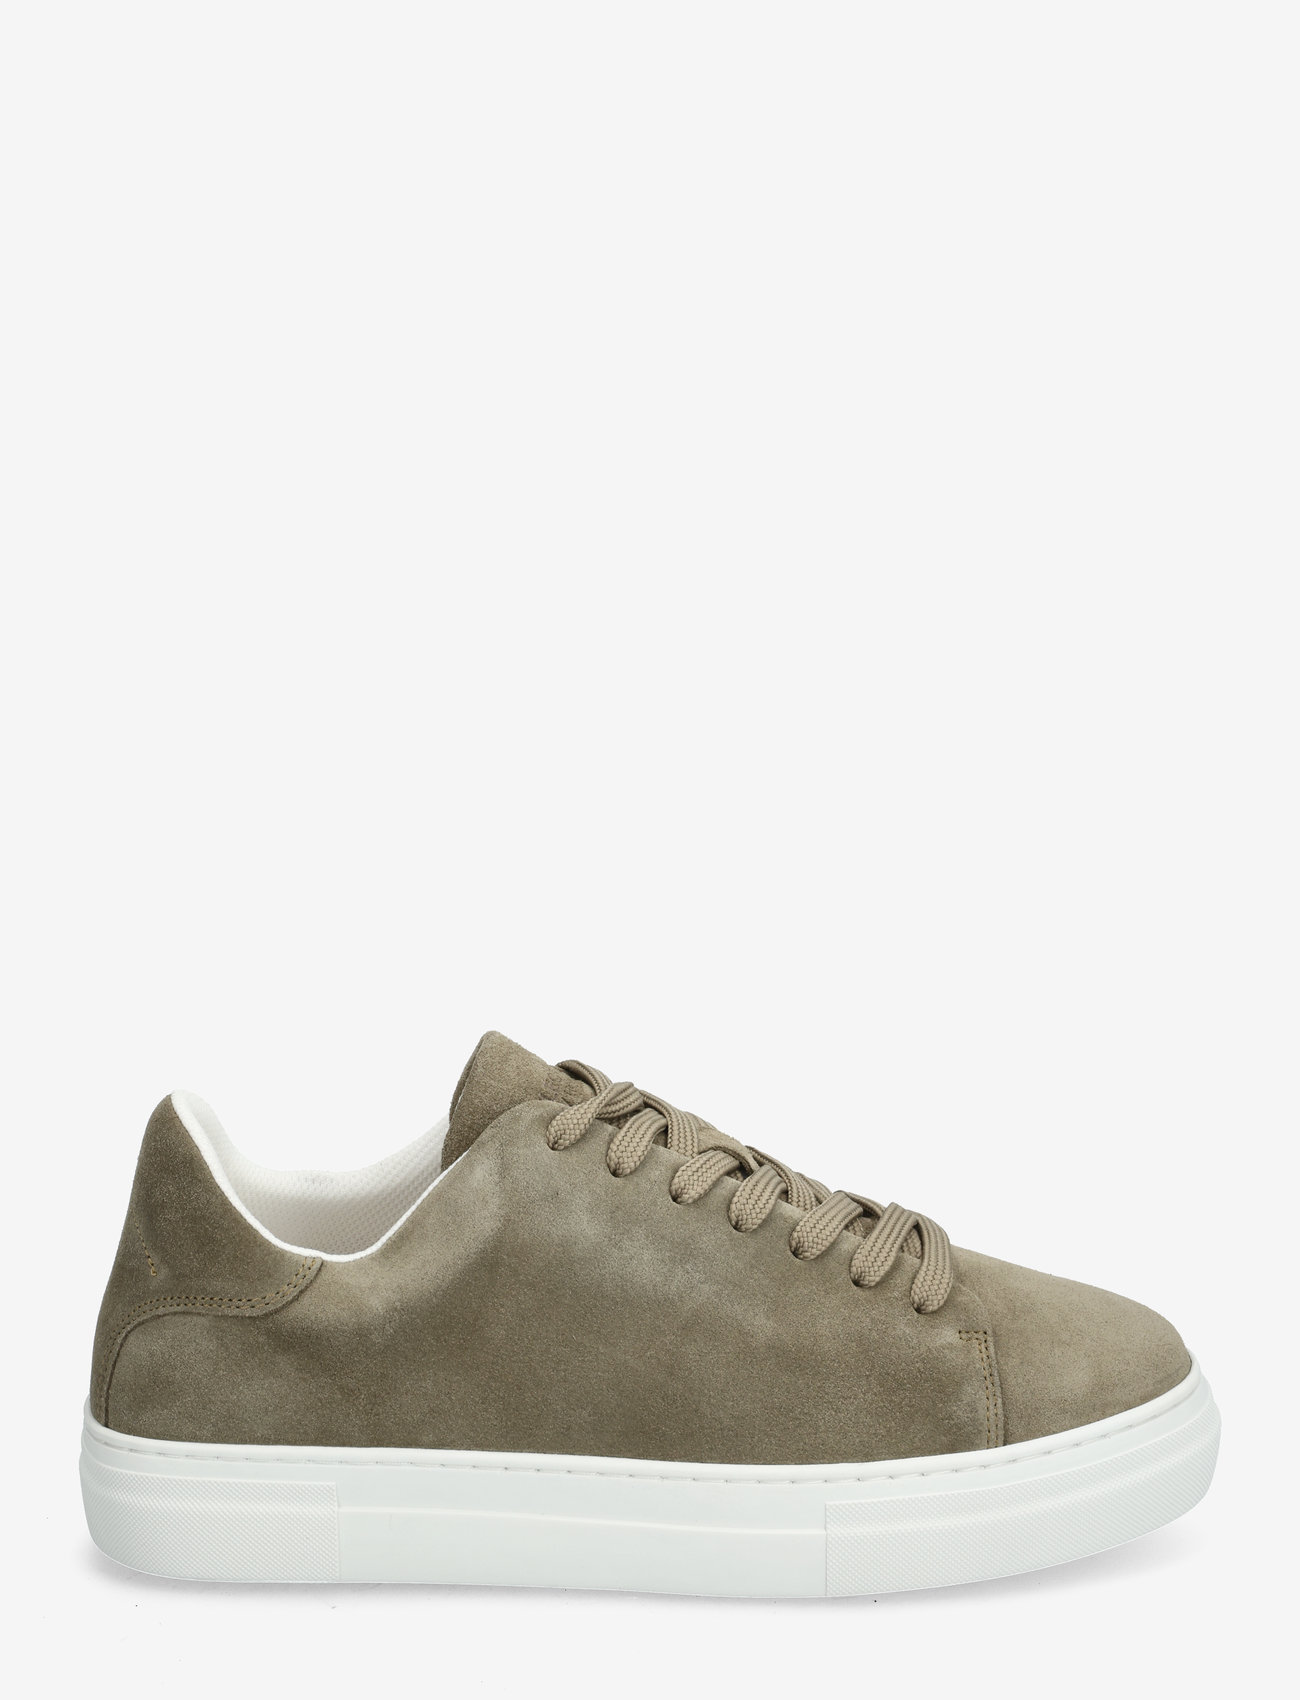 Selected Homme - SLHDAVID CHUNKY CLEAN SUEDE TRAINER B - låga sneakers - grape leaf - 1